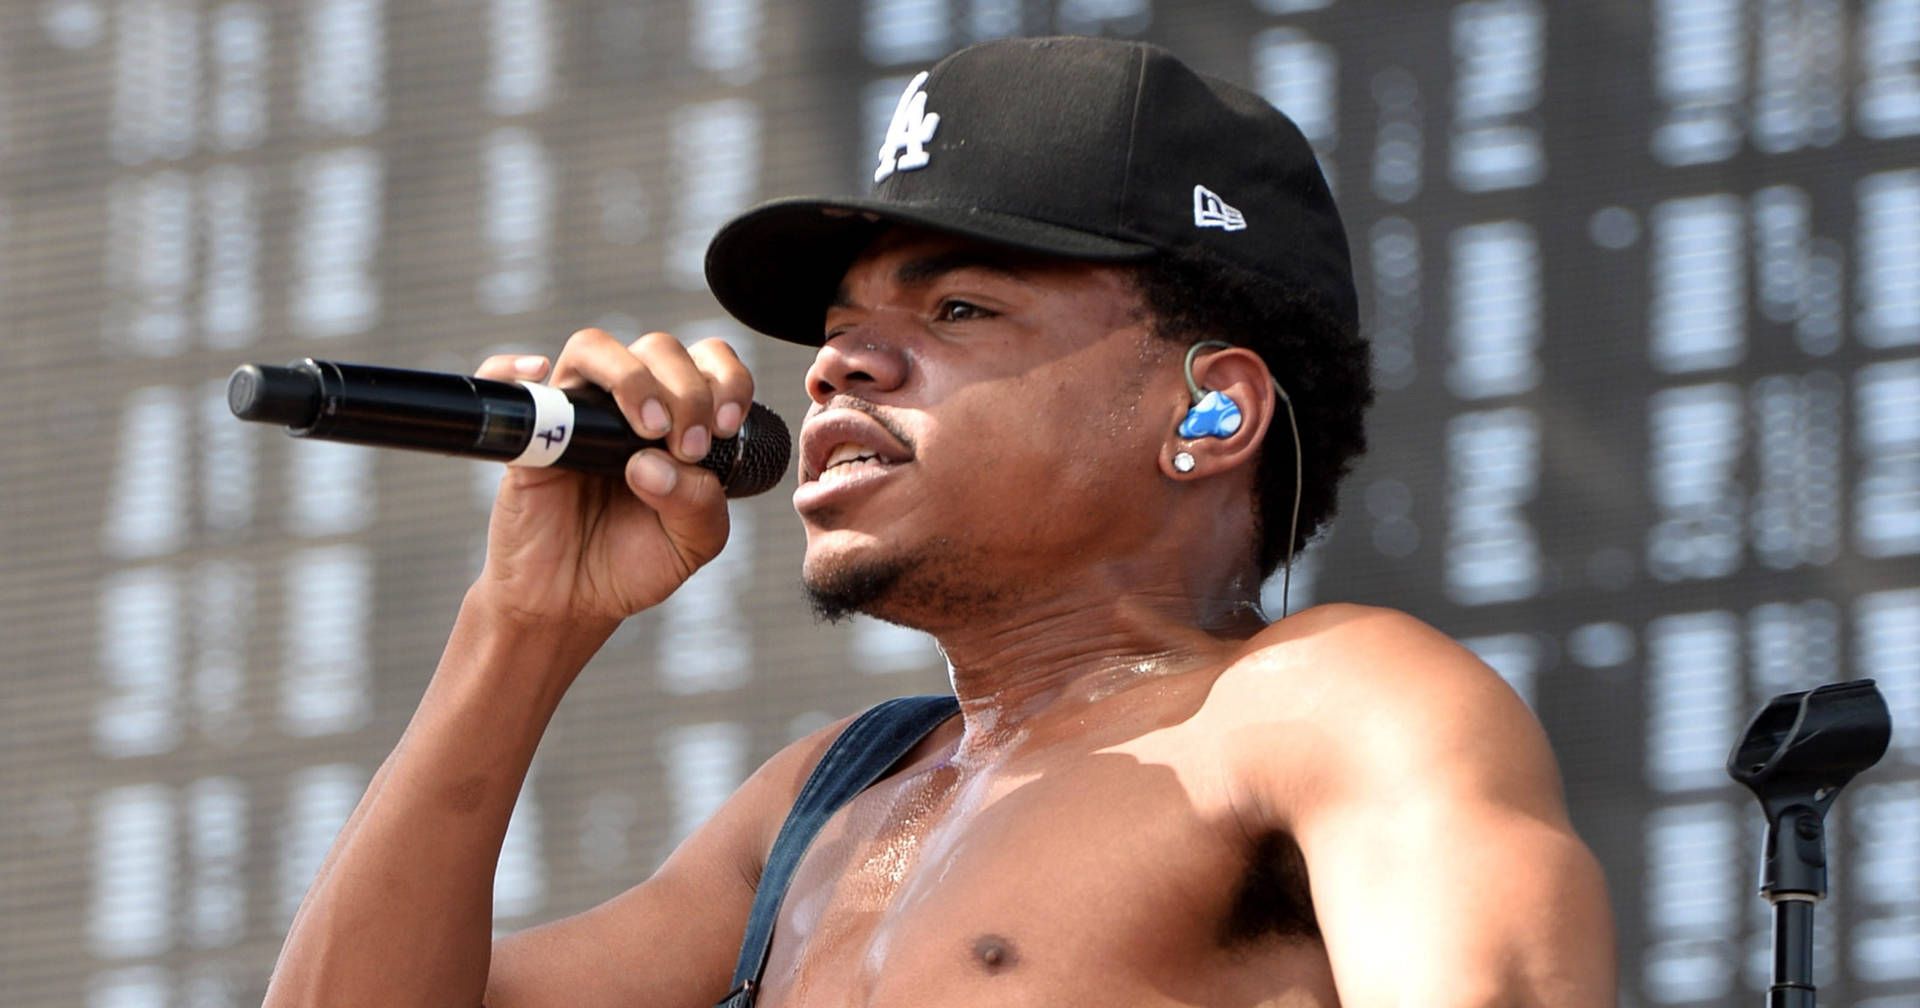 A man with no shirt on holding up his microphone - Chance the Rapper